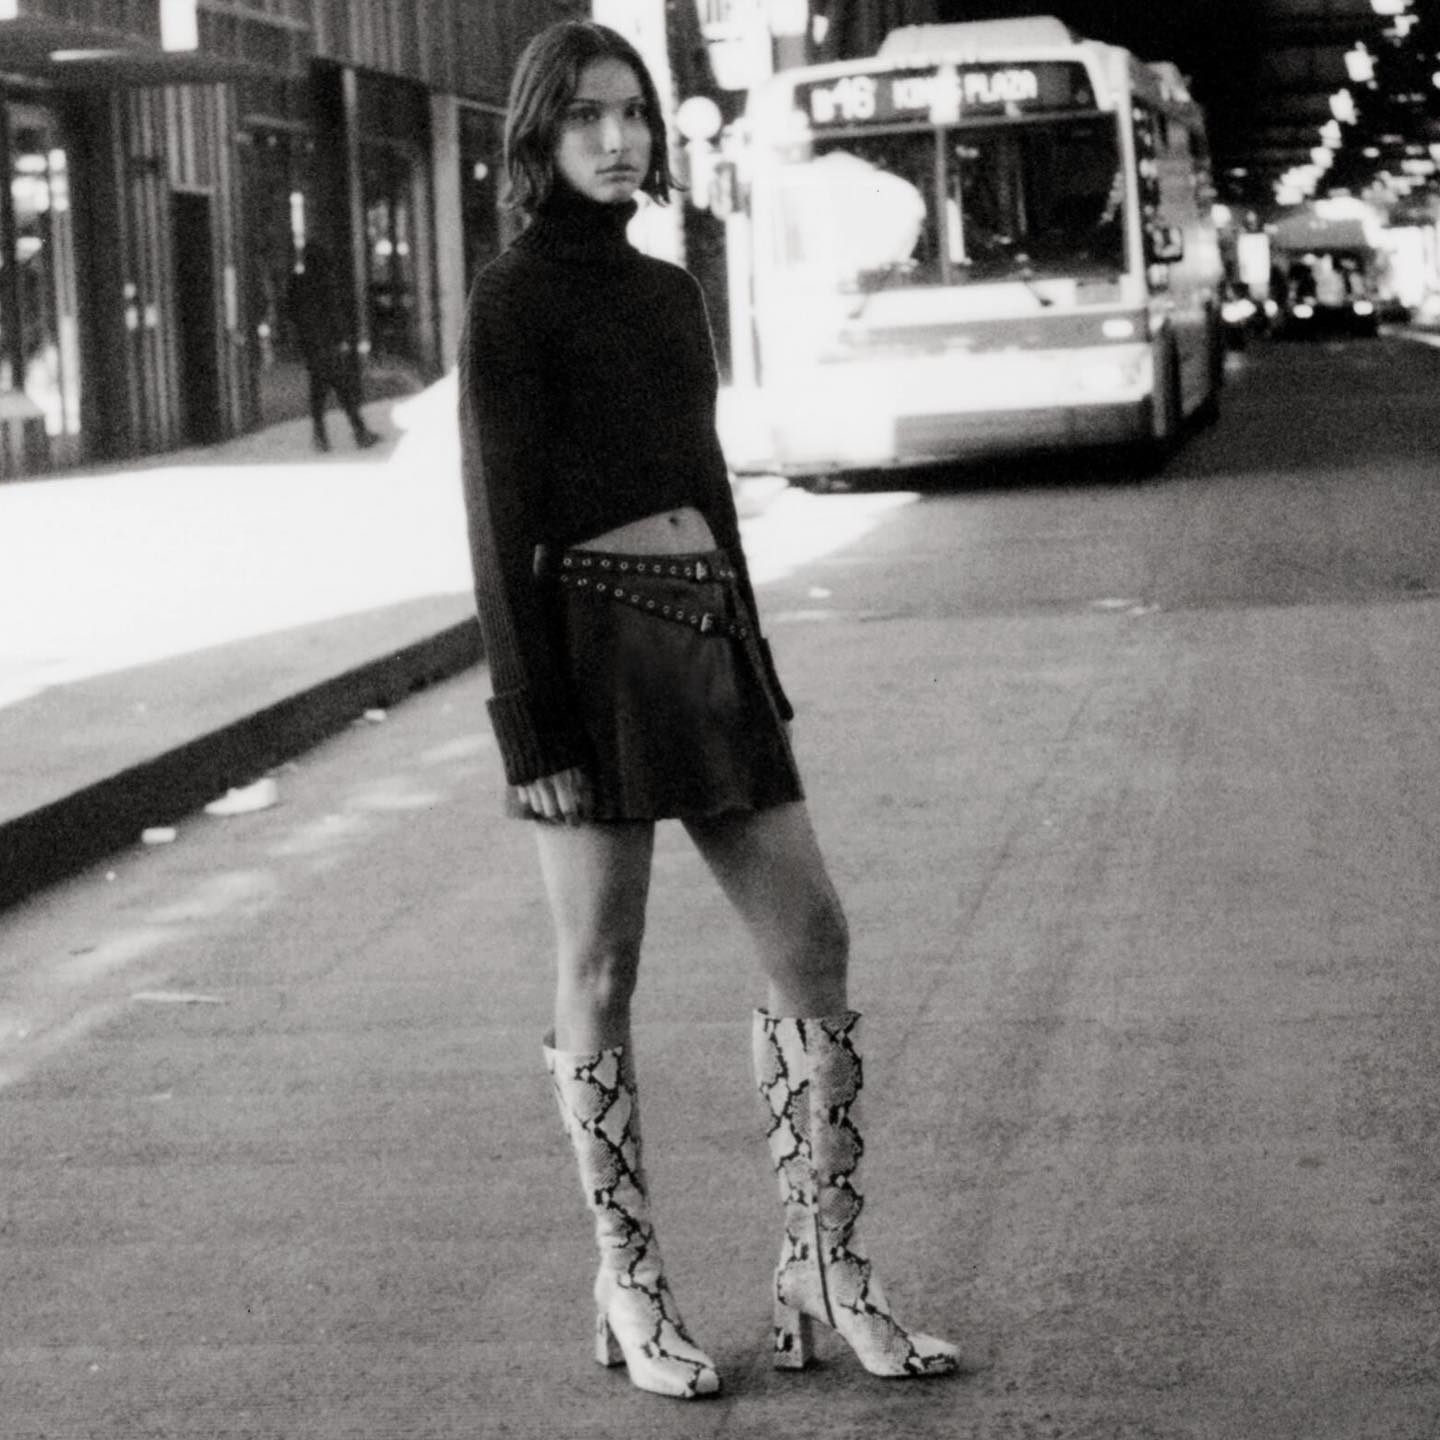 Woman wears Zara black sweater, leather mini skirt and snakeskin boots in black and white photograph 